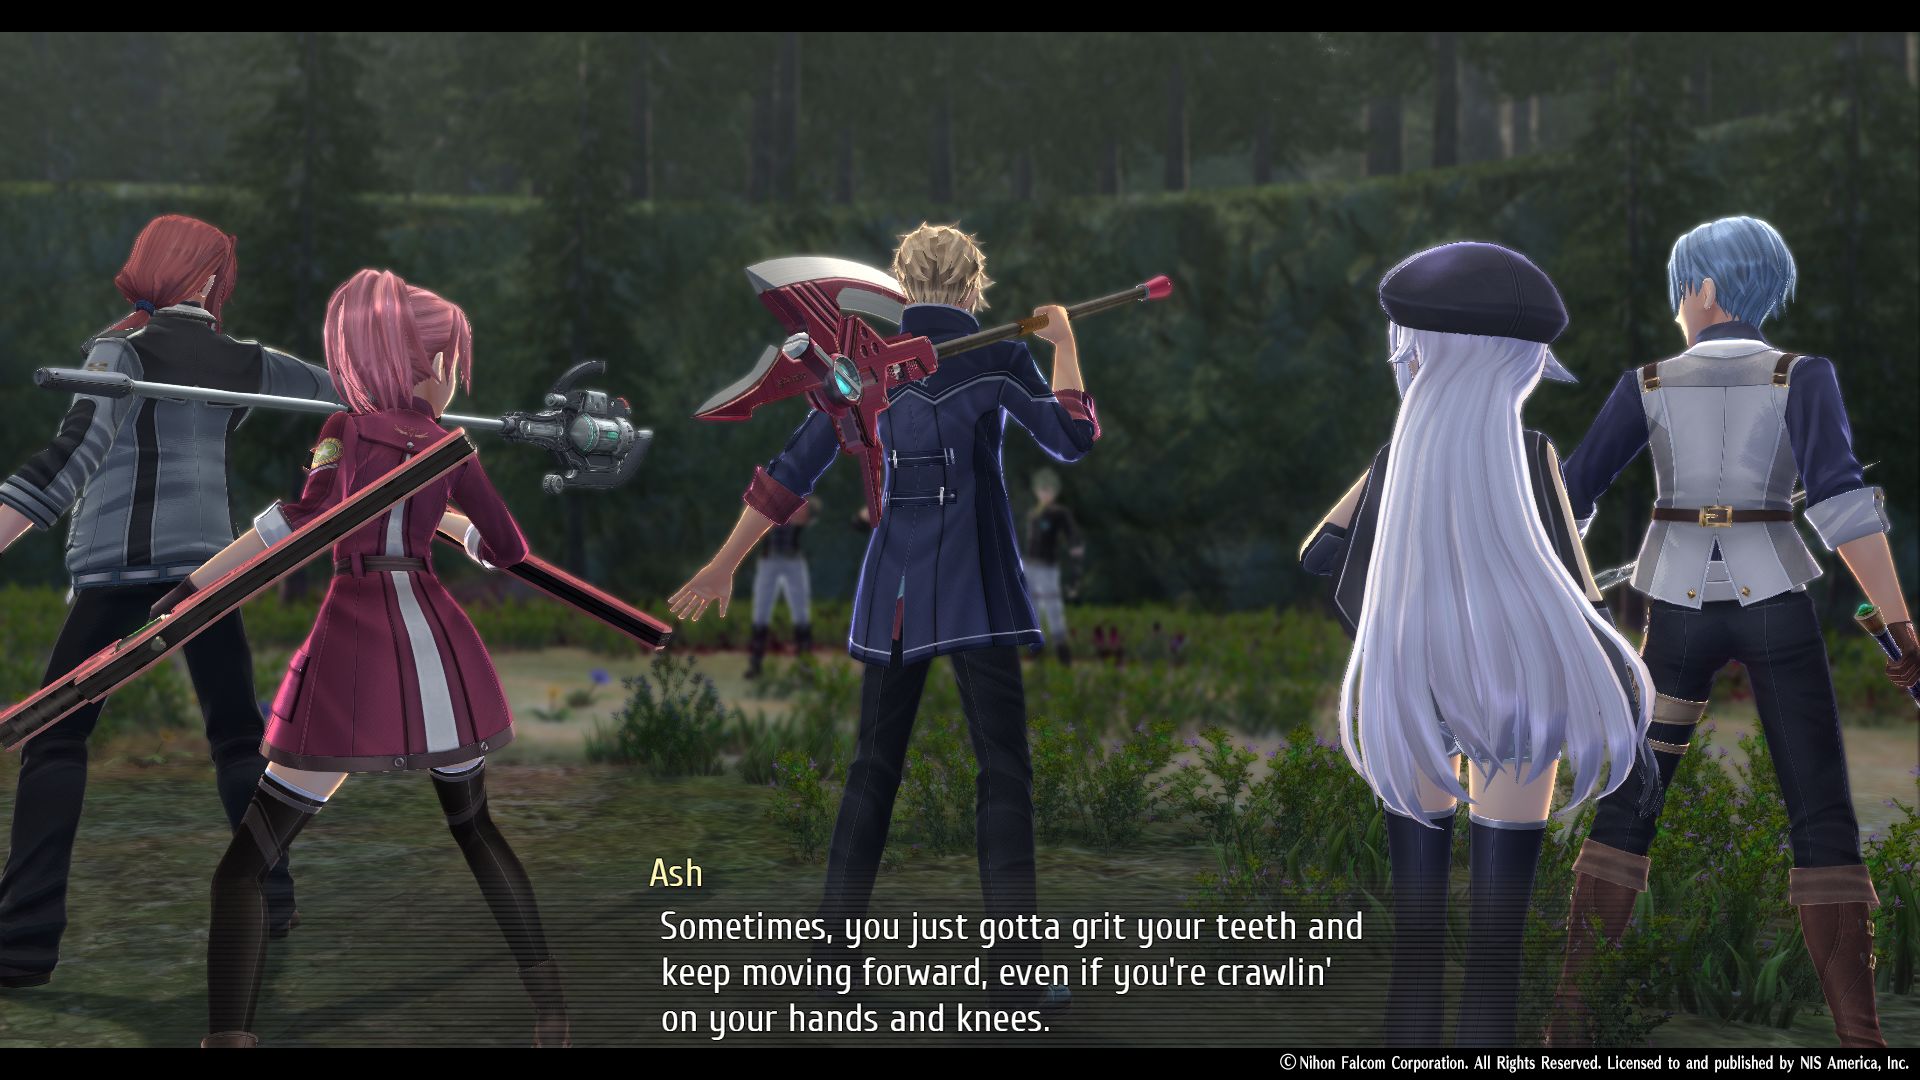 The Legend of Heroes: Trails of Cold Steel IV - Recensione